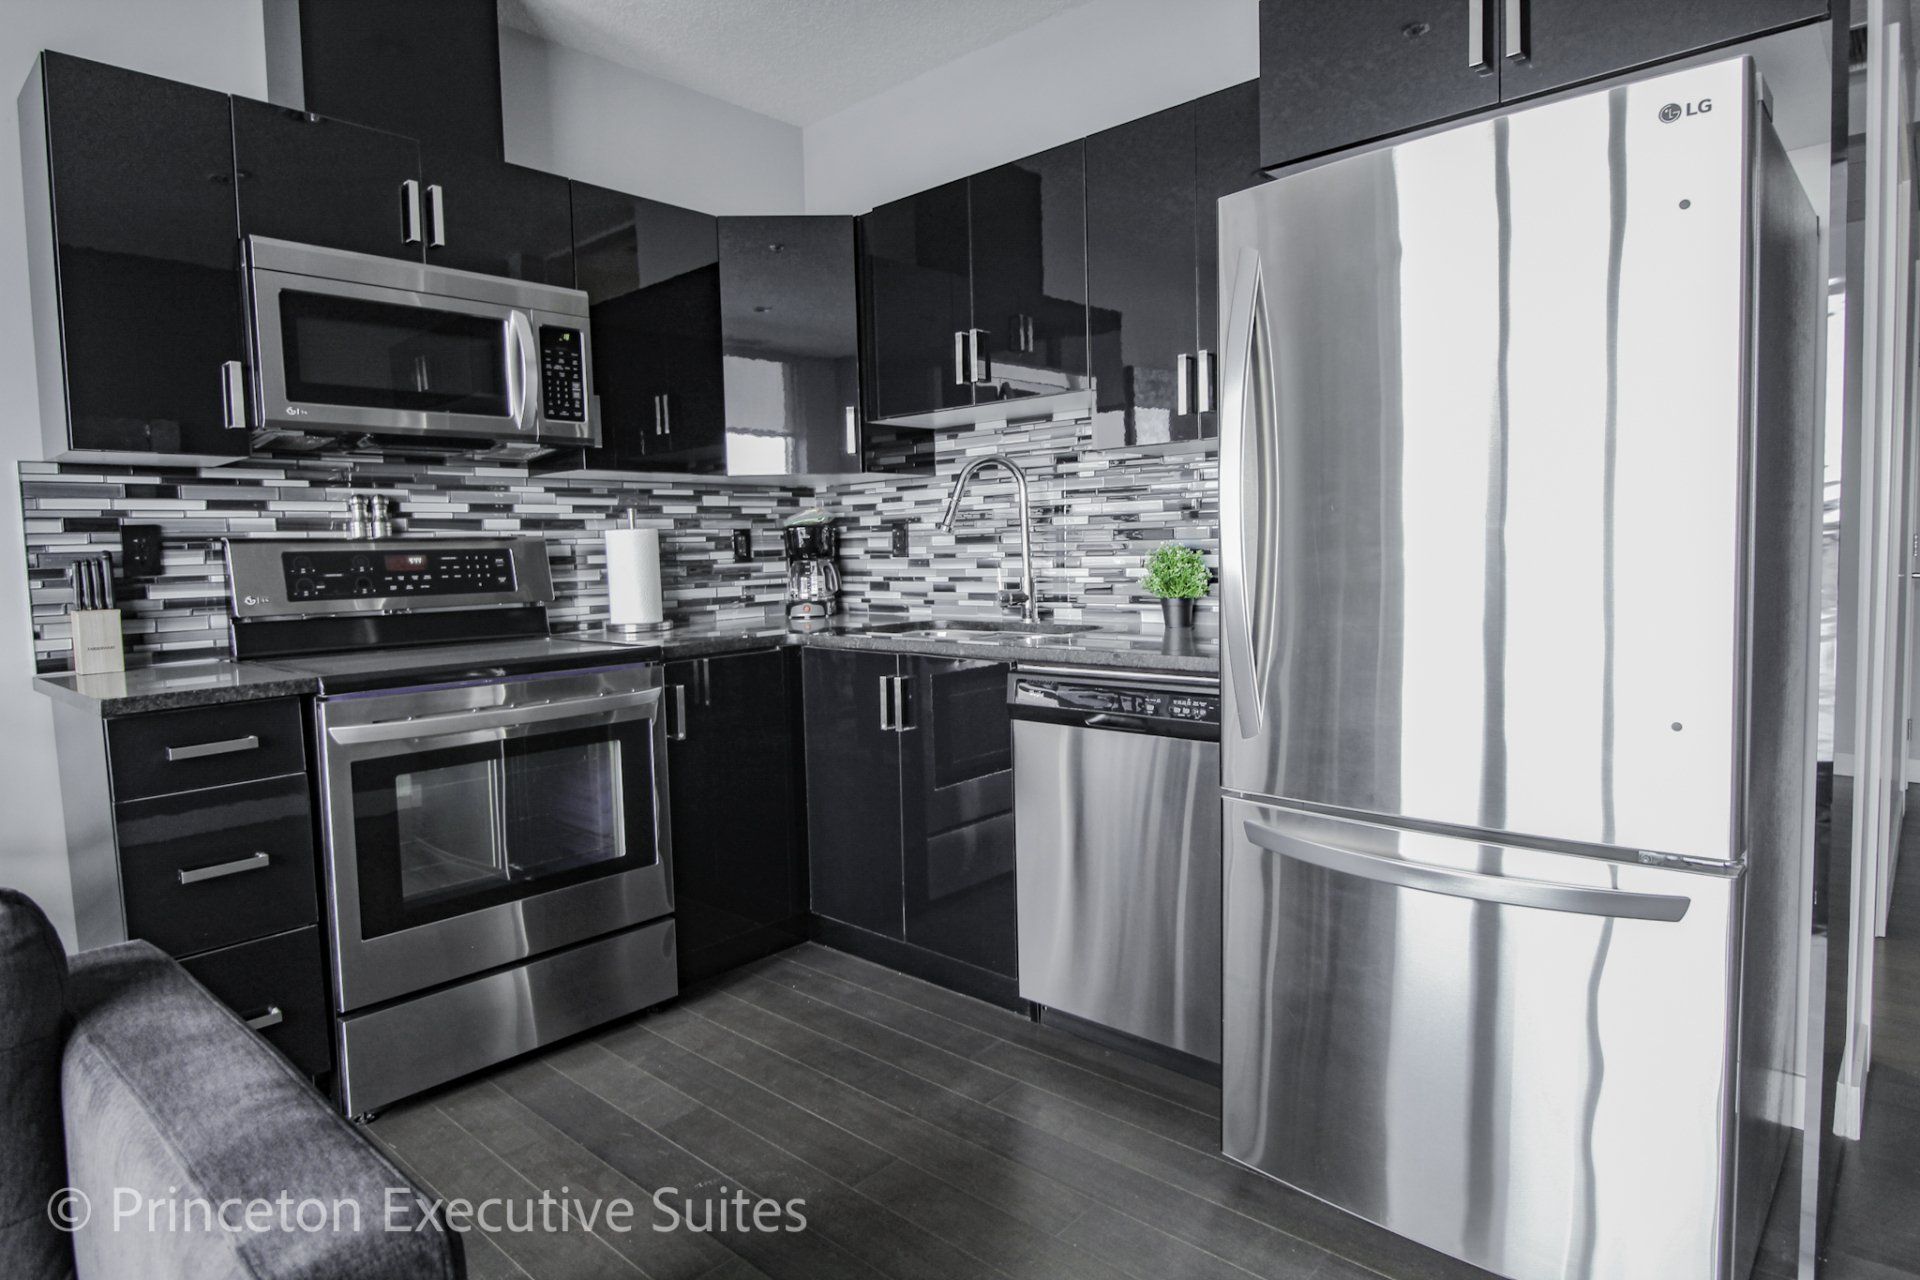 Stainless steel fridge stove and microwave in this furnished condo